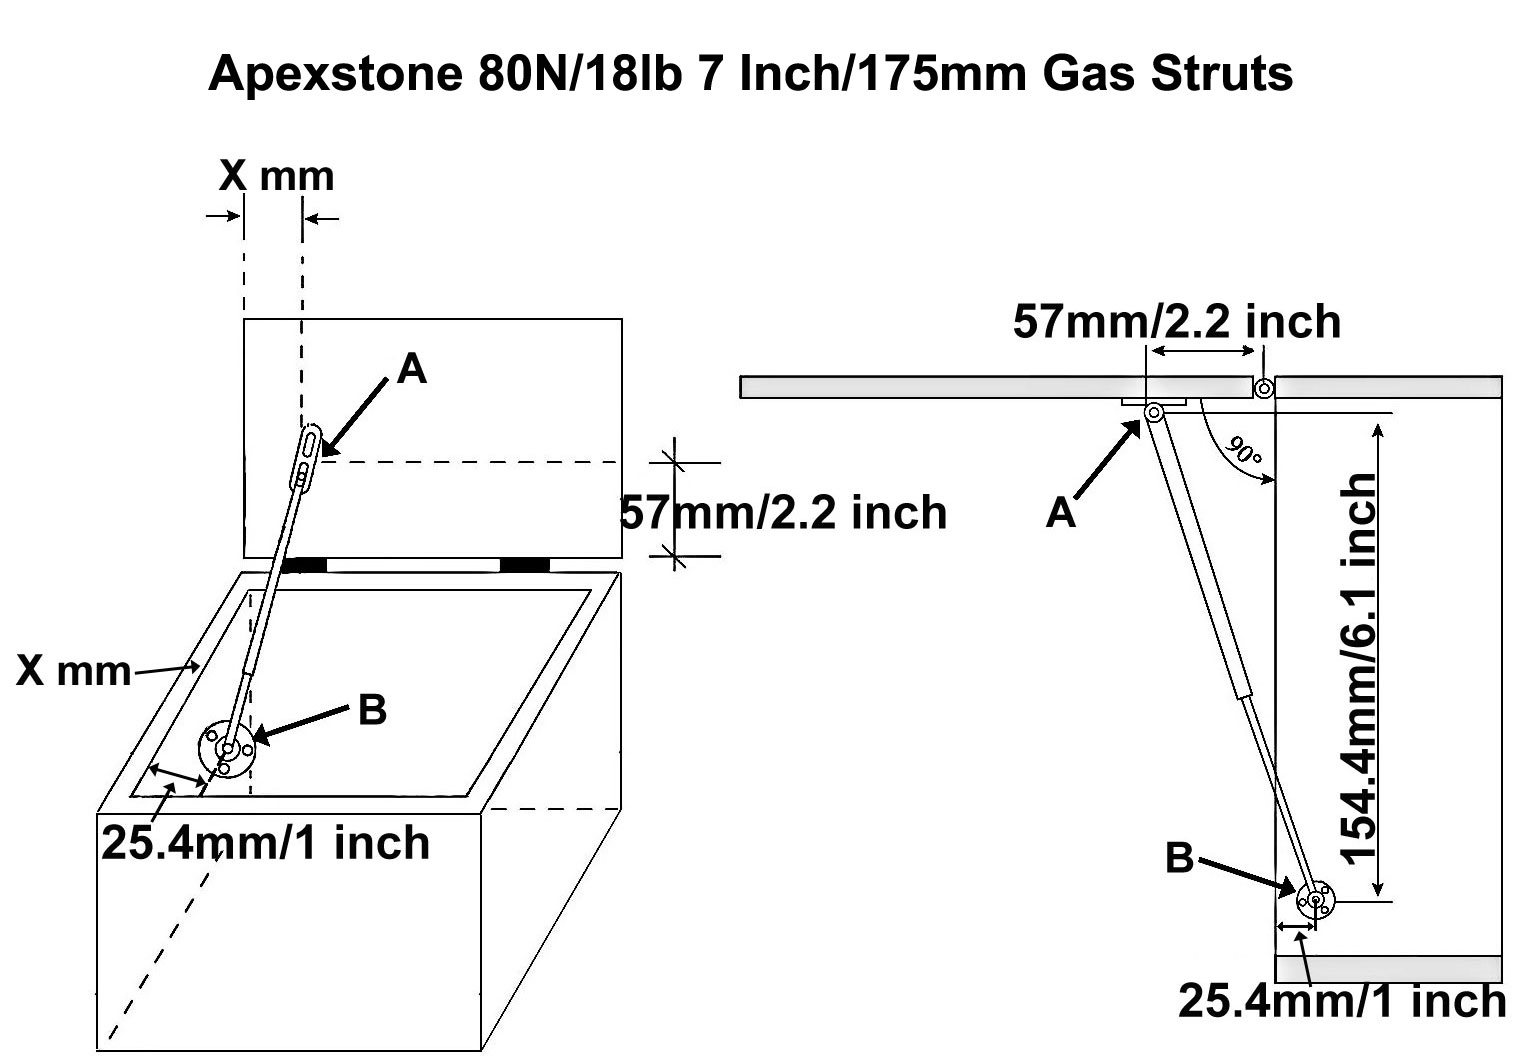 Apexstone 7 inch gas struts mounting guide